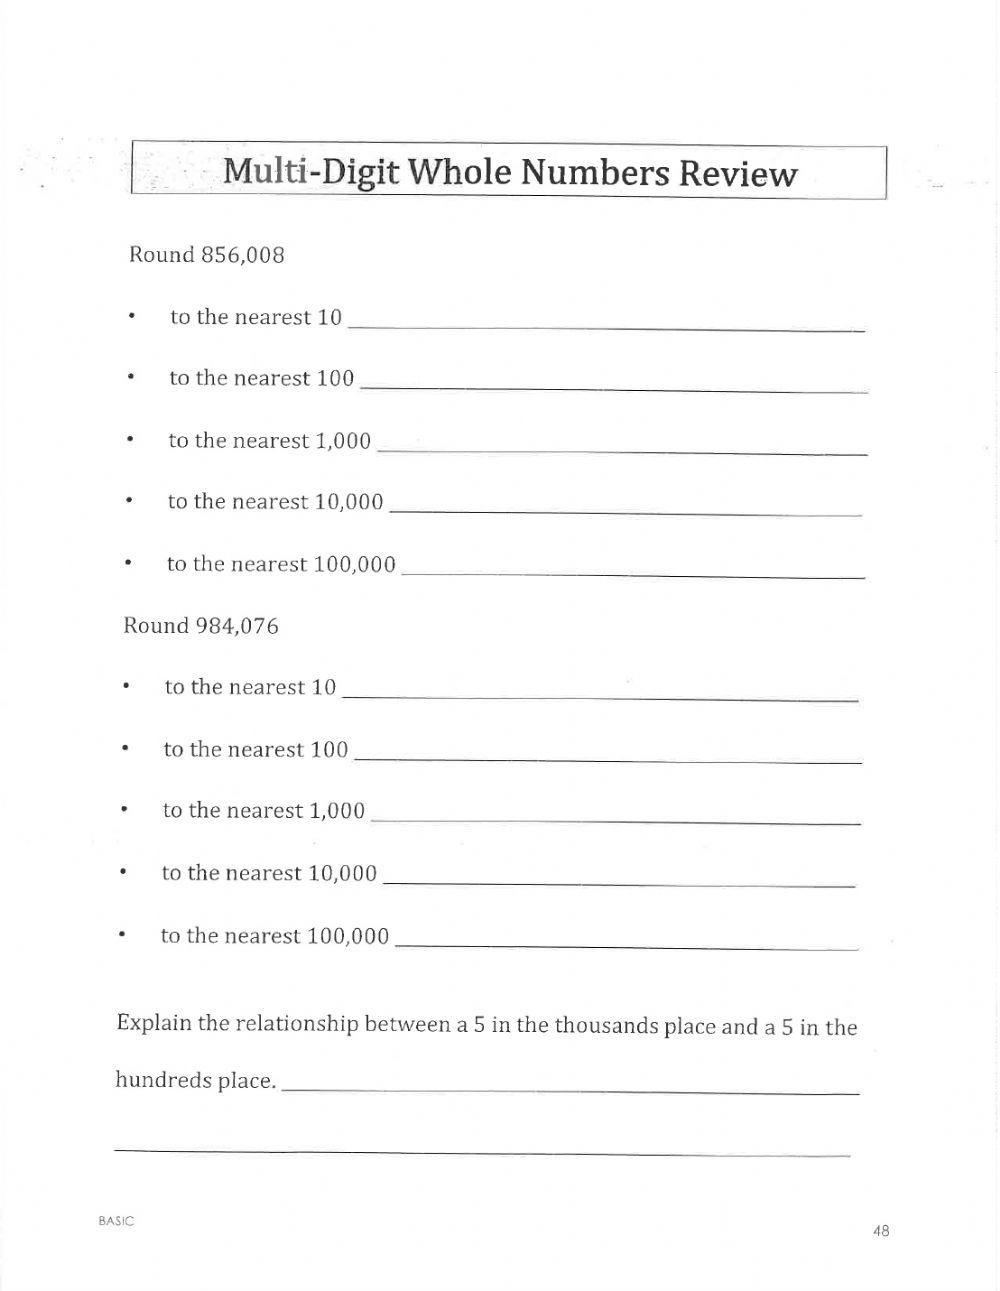 Multi-Digit Whole Numbers Review